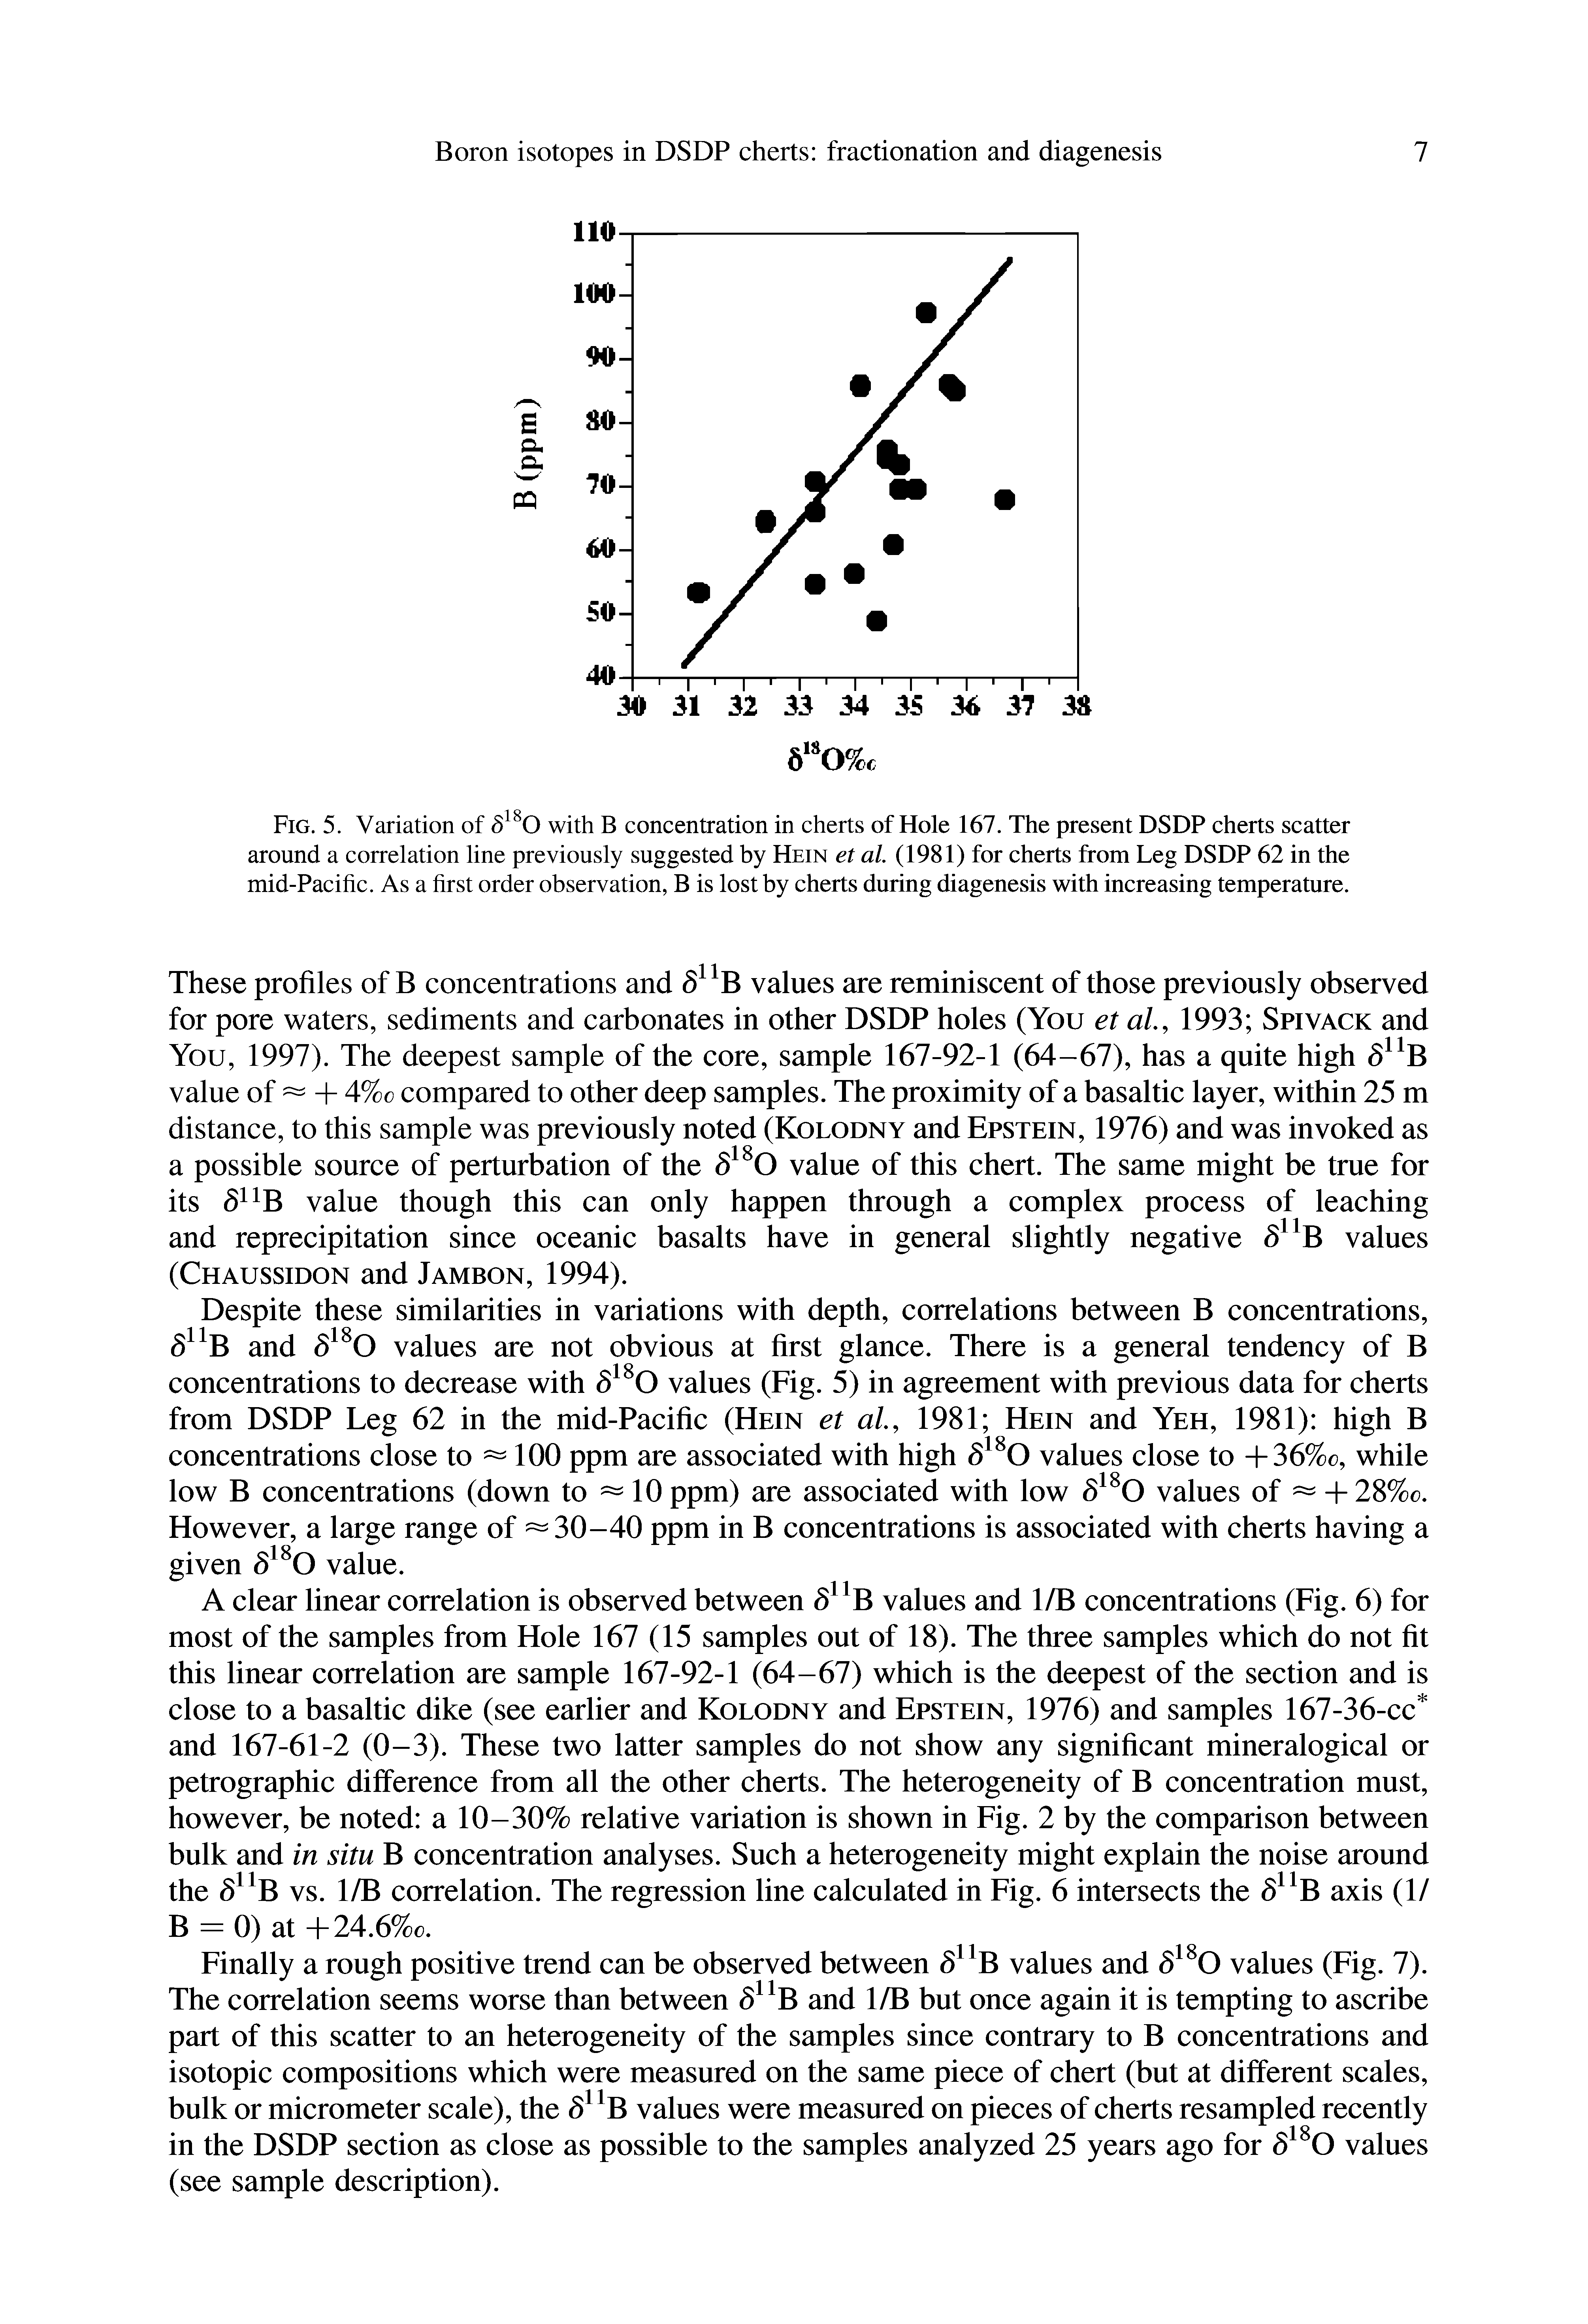 Fig. 5. Variation of with B concentration in cherts of Hole 167. The present DSDP cherts scatter around a correlation line previously suggested by Hein et al. (1981) for cherts from Leg DSDP 62 in the mid-Pacific. As a first order observation, B is lost by cherts during diagenesis with increasing temperature.